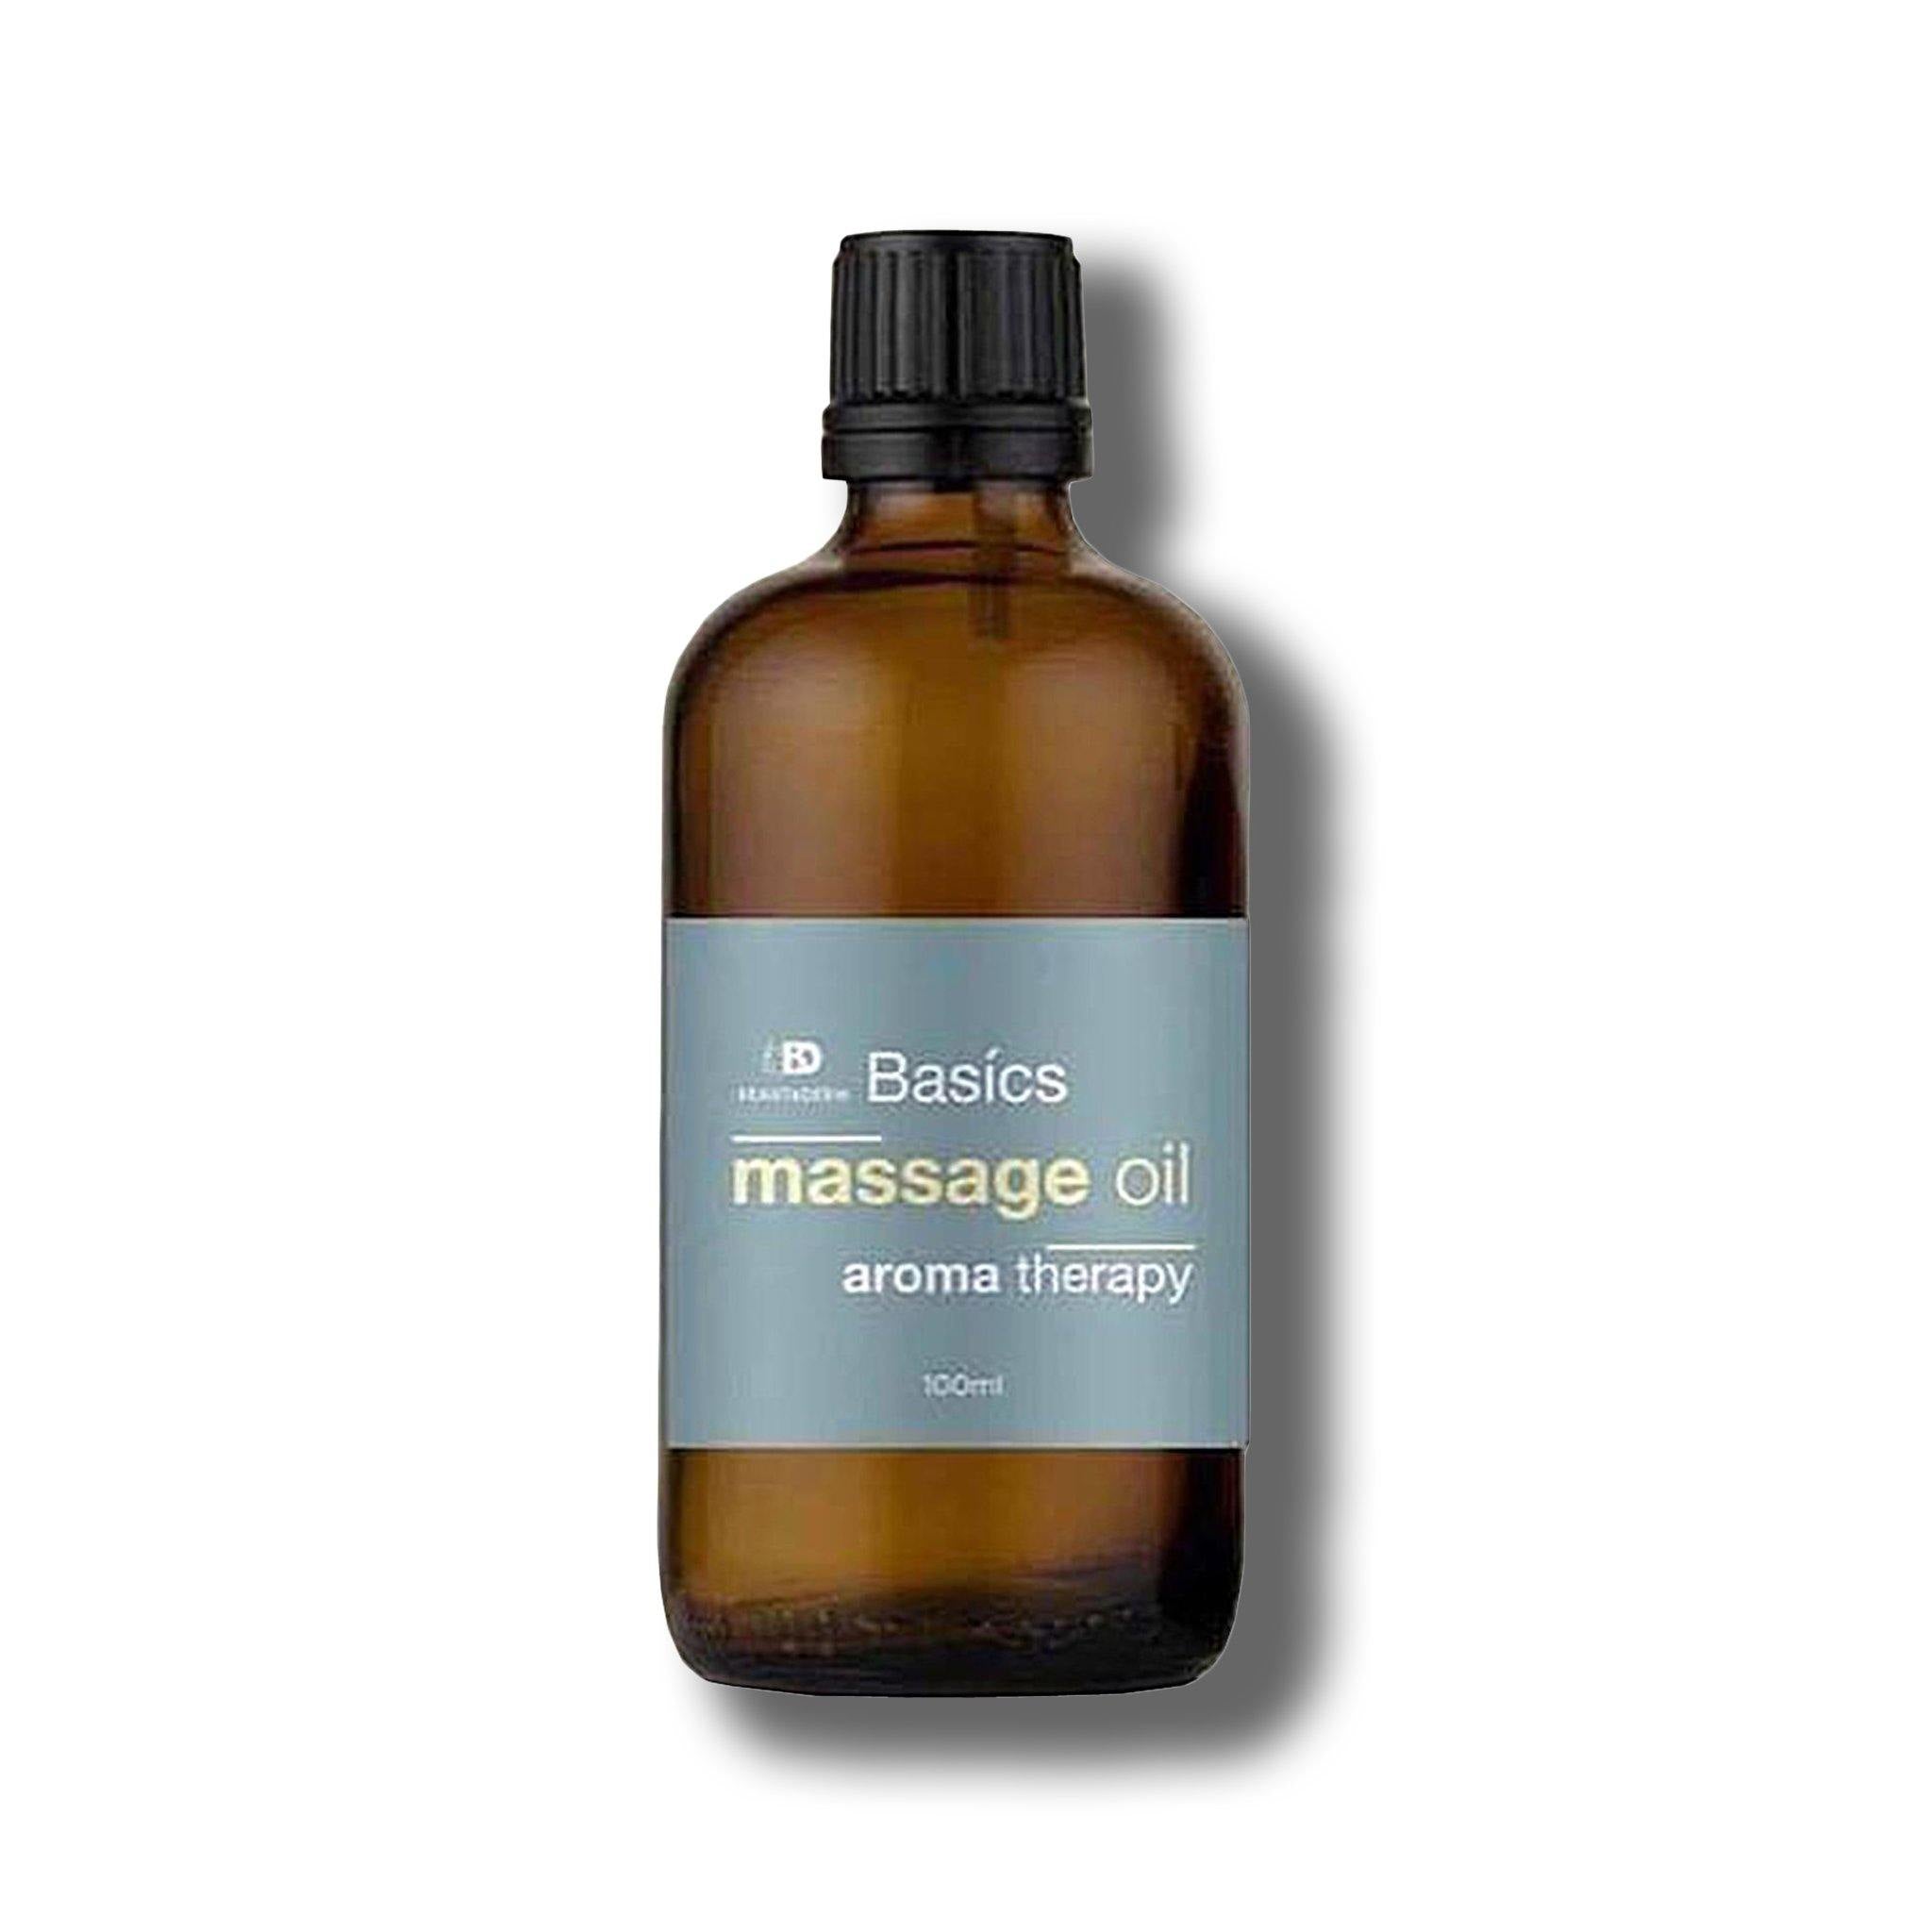 Basics Massage Oil Aroma Therapy, 100ml, by Beautederm